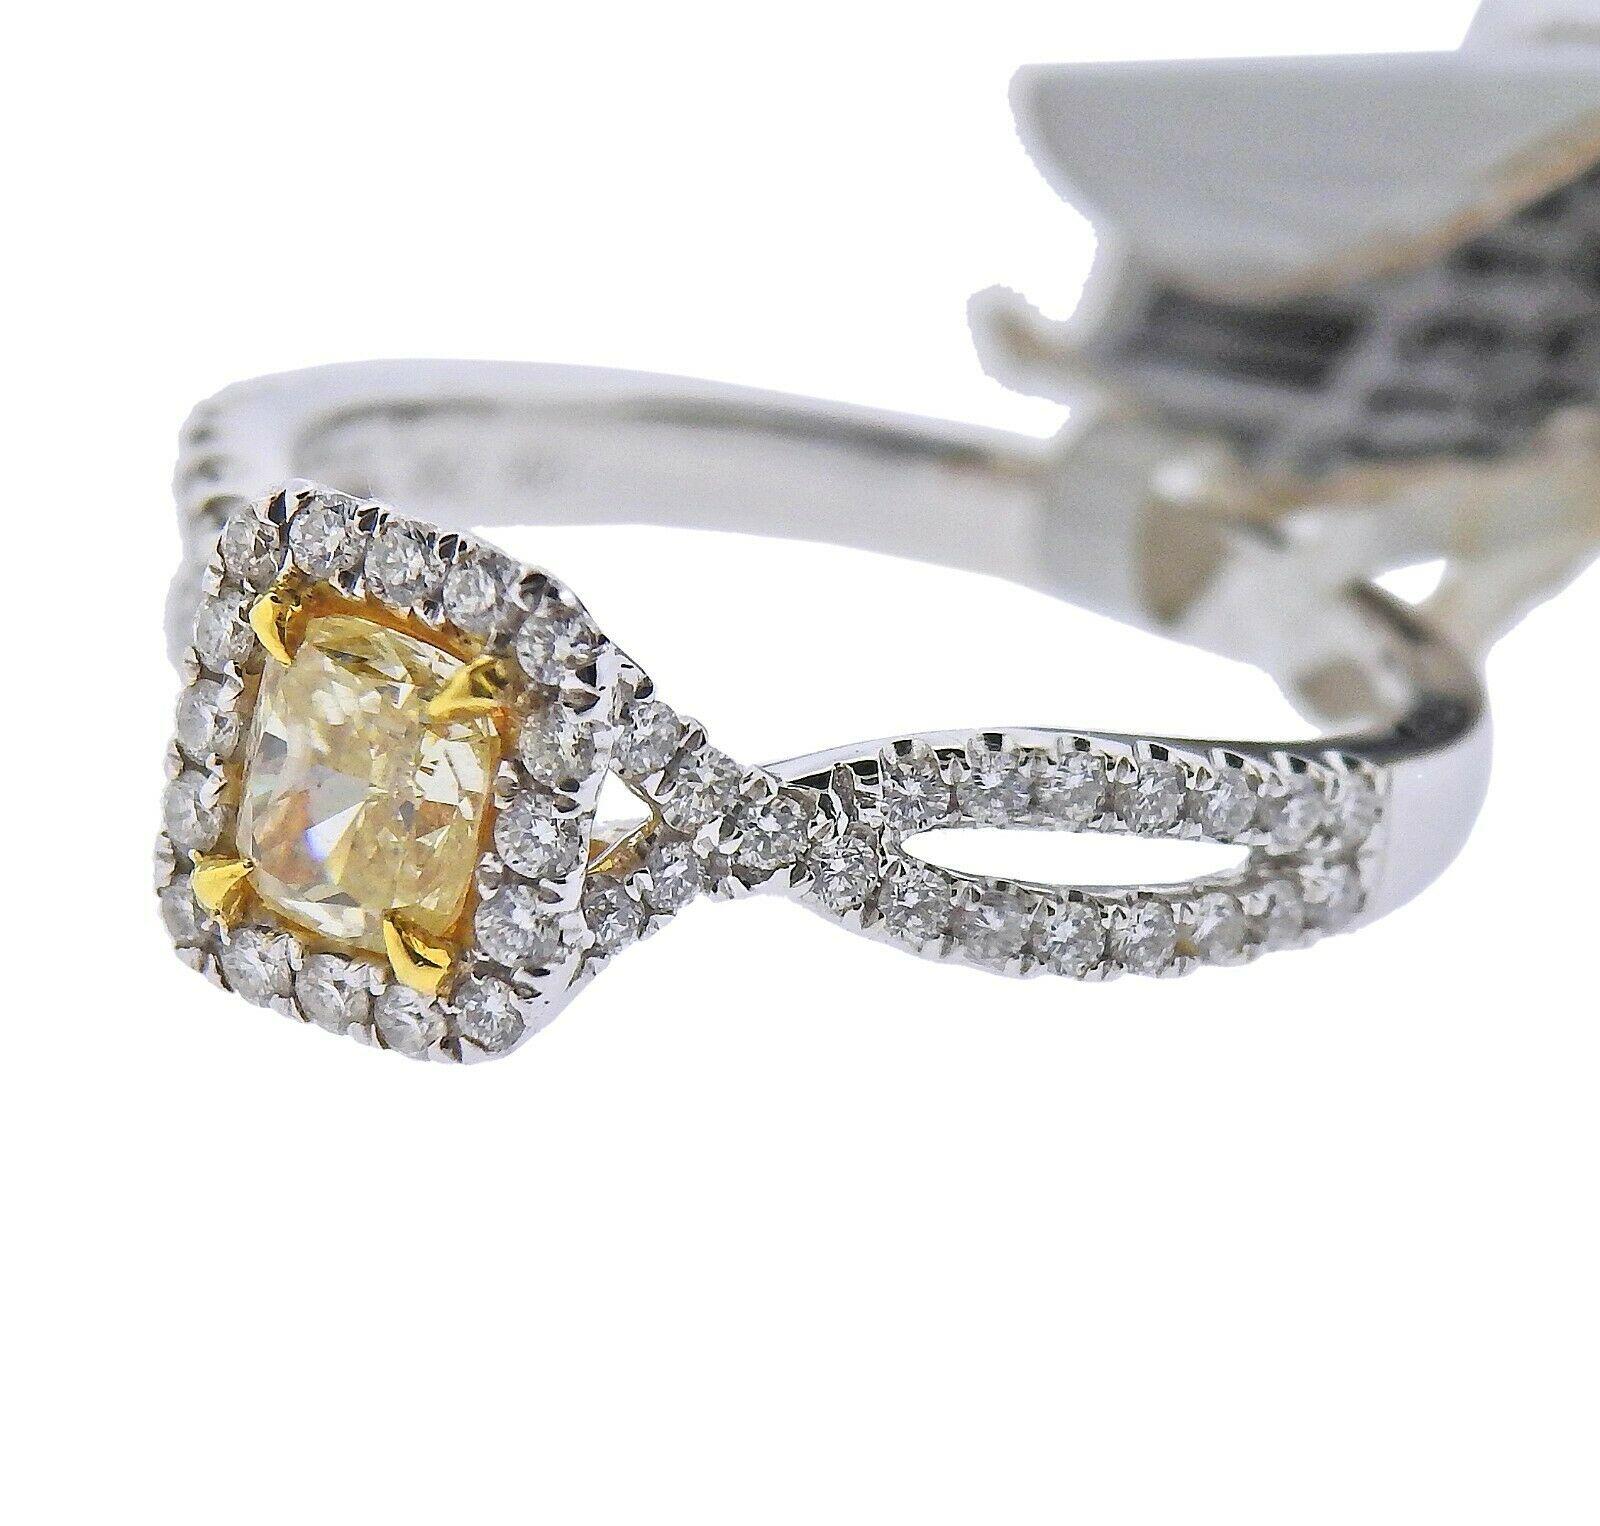 18k White gold ring by Dalumi. Set with a 0.51ctw VS2/ fancy light Yellow diamond, and 0.40ctw of VS2/H diamonds. Ring size - 6.5, ring top - 8mm x 7.5mm. Marked - DG, 0.51ct, 18k, 750.. Weight - 3.4 grams. Retail $6599
